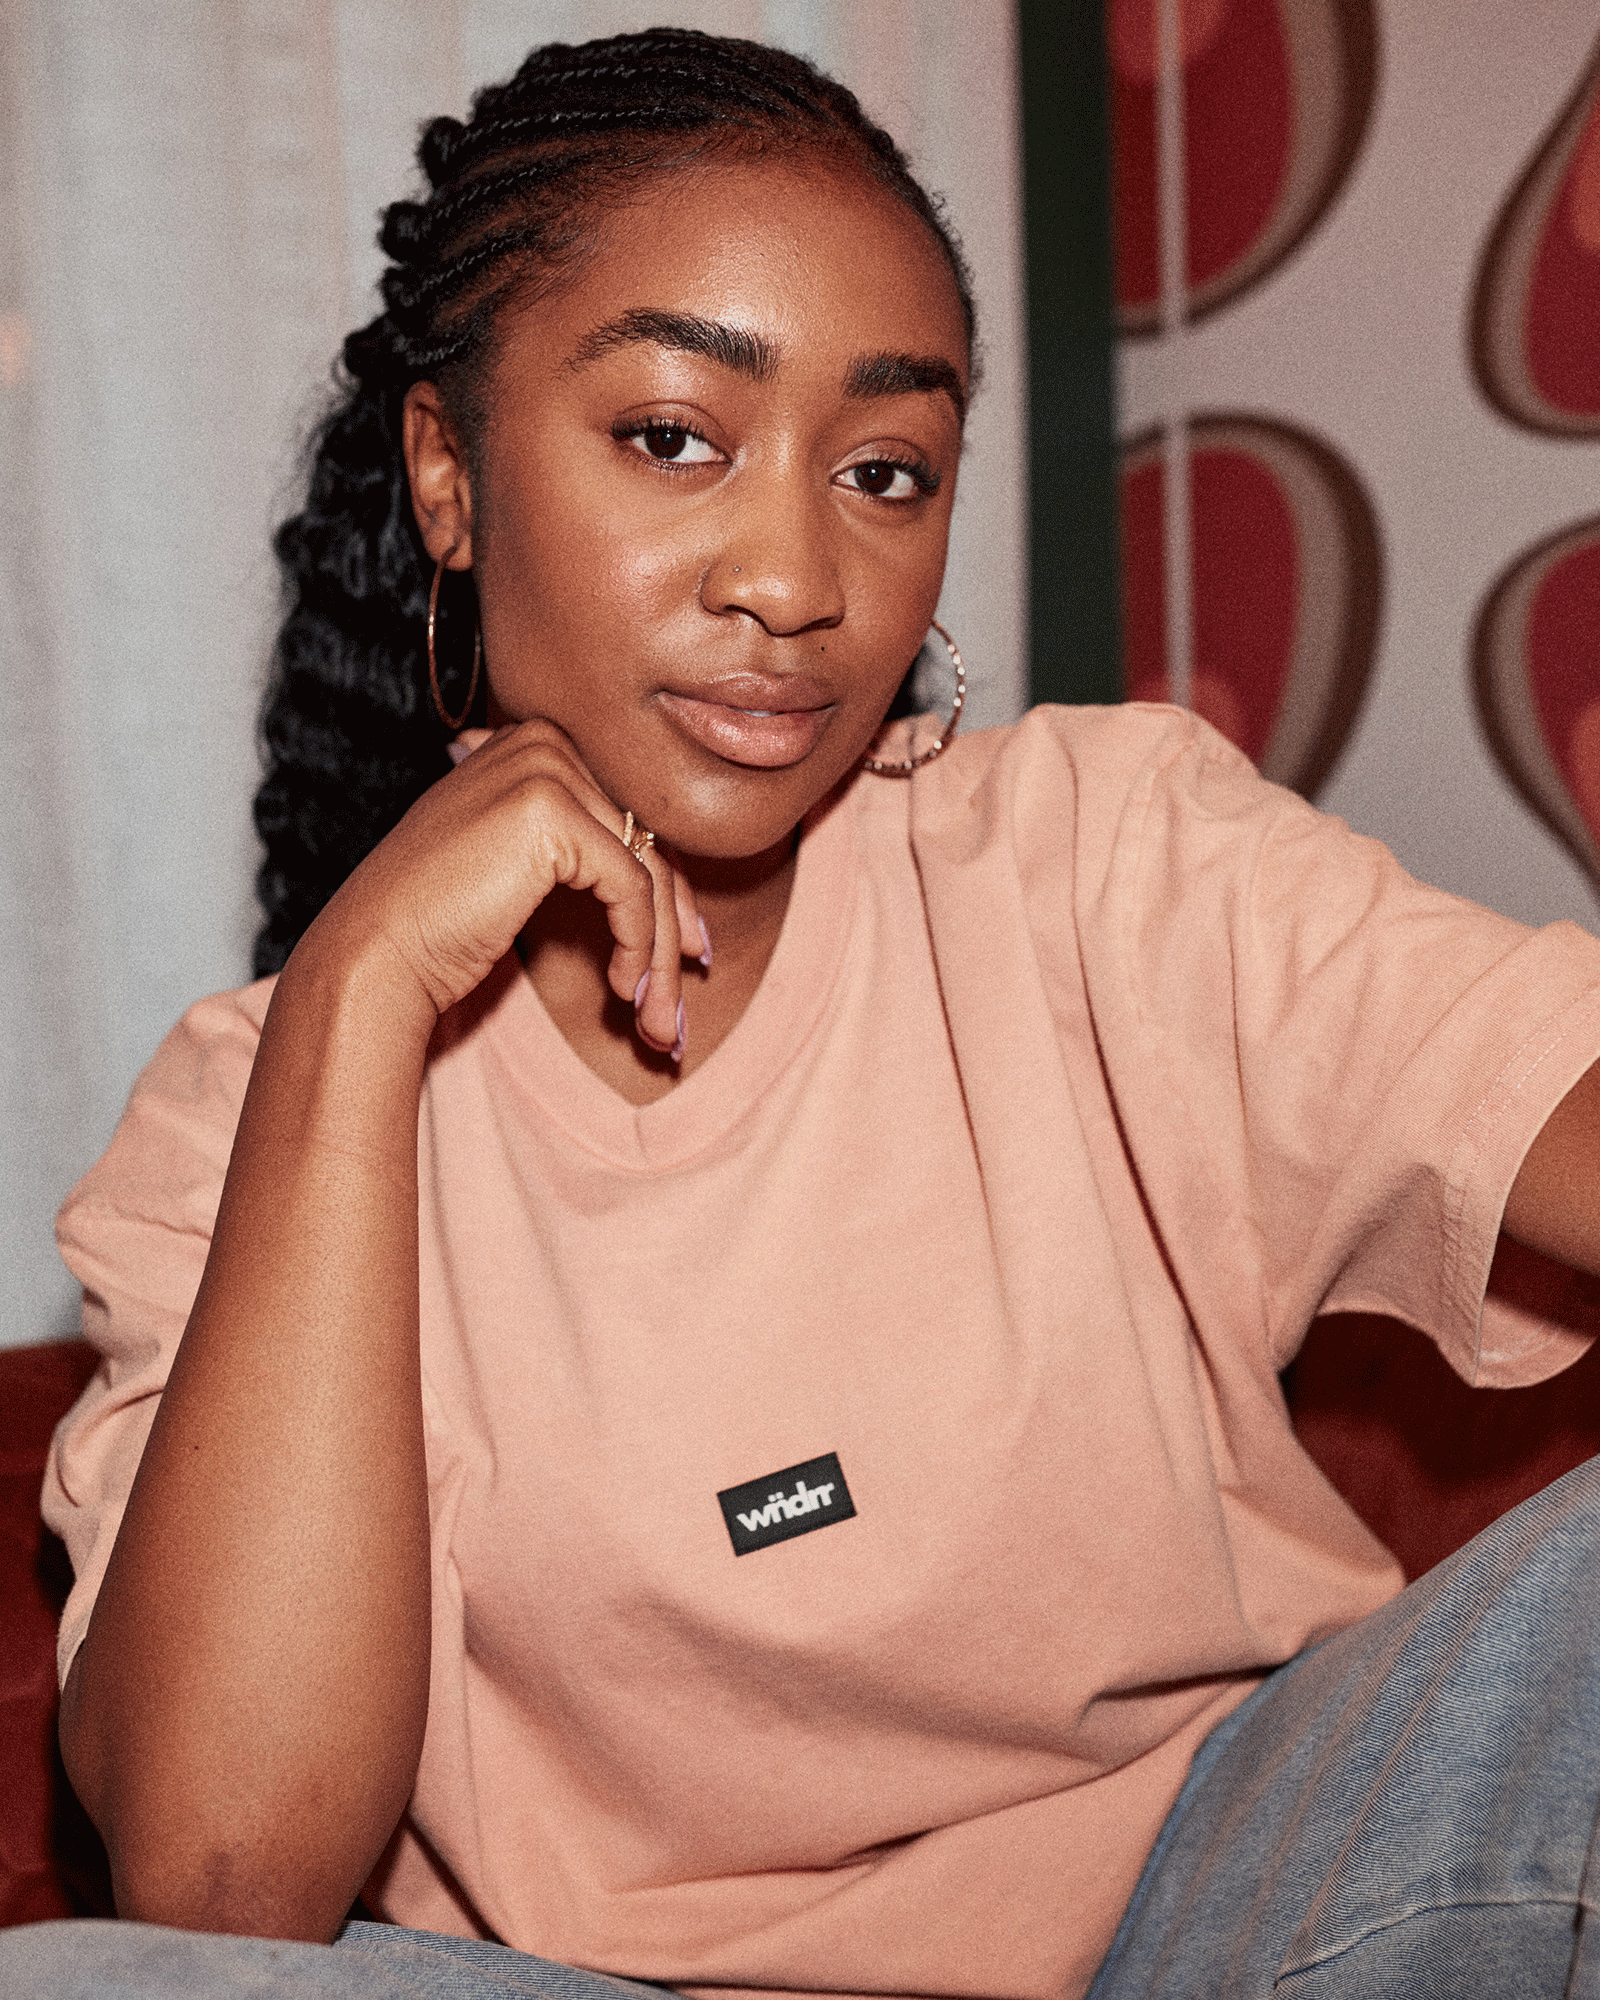 HOXTON VINTAGE FIT TEE - WASHED PEACH